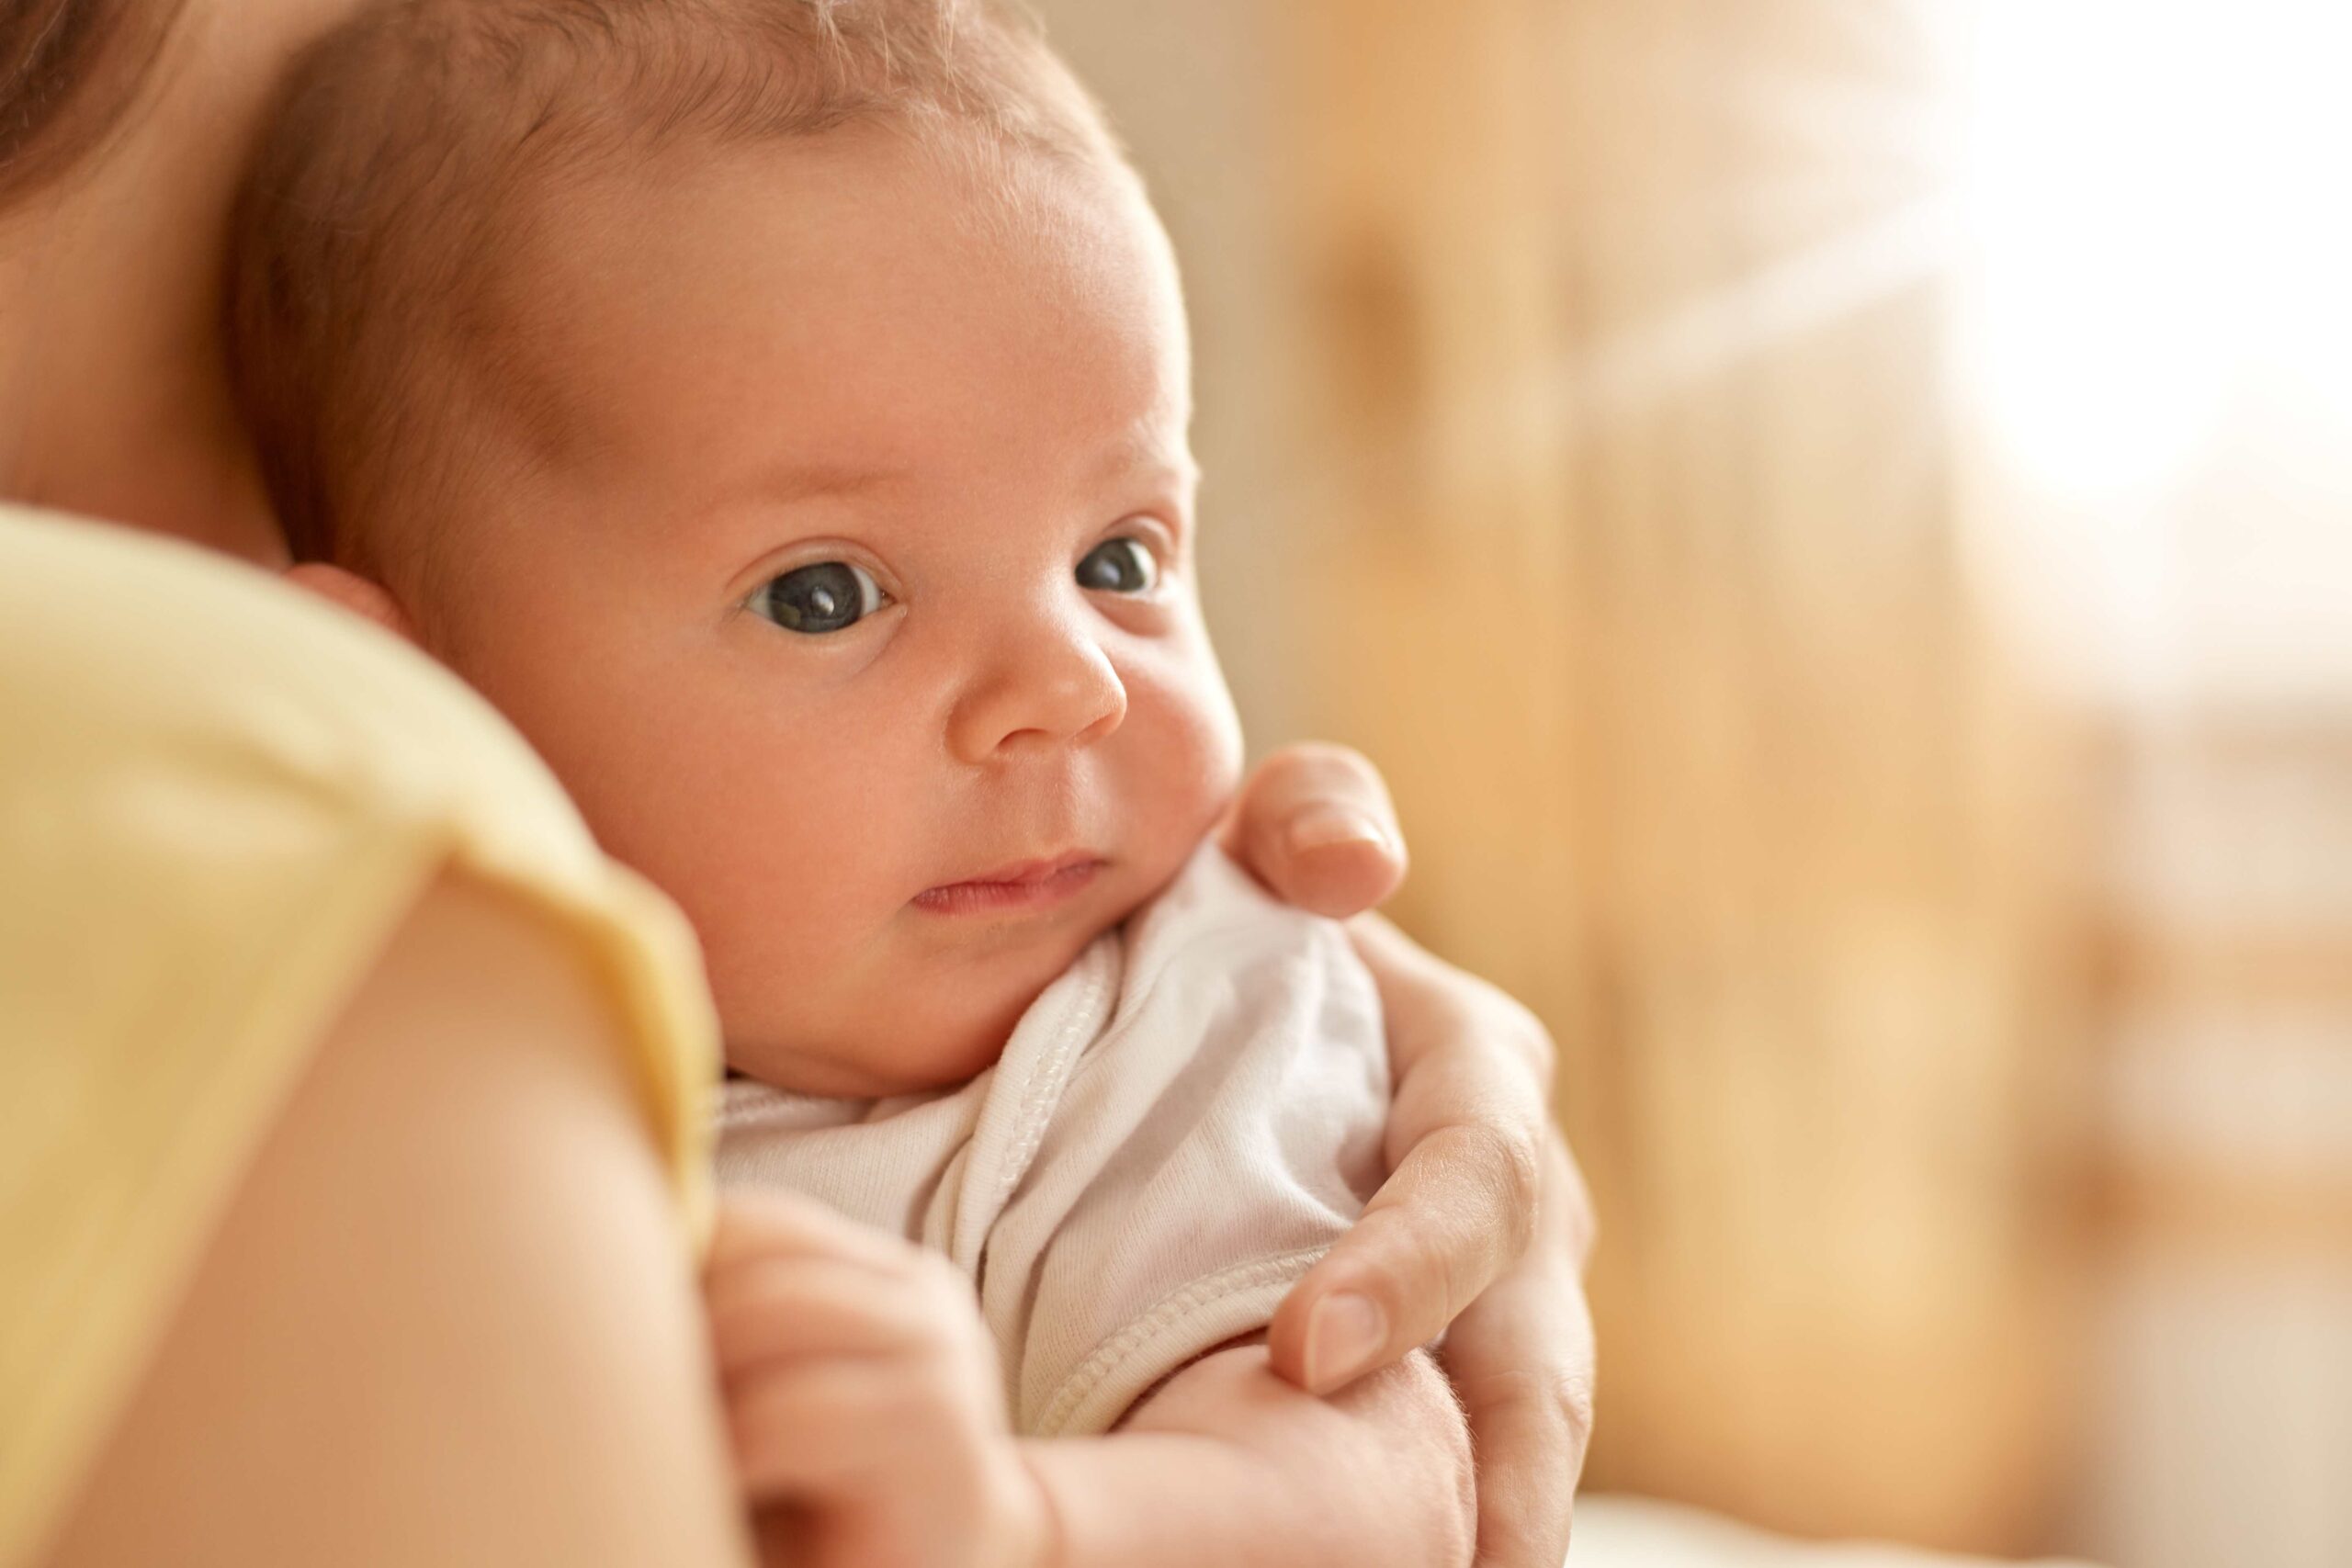 Baby Acne: What Causes It and How to Manage It